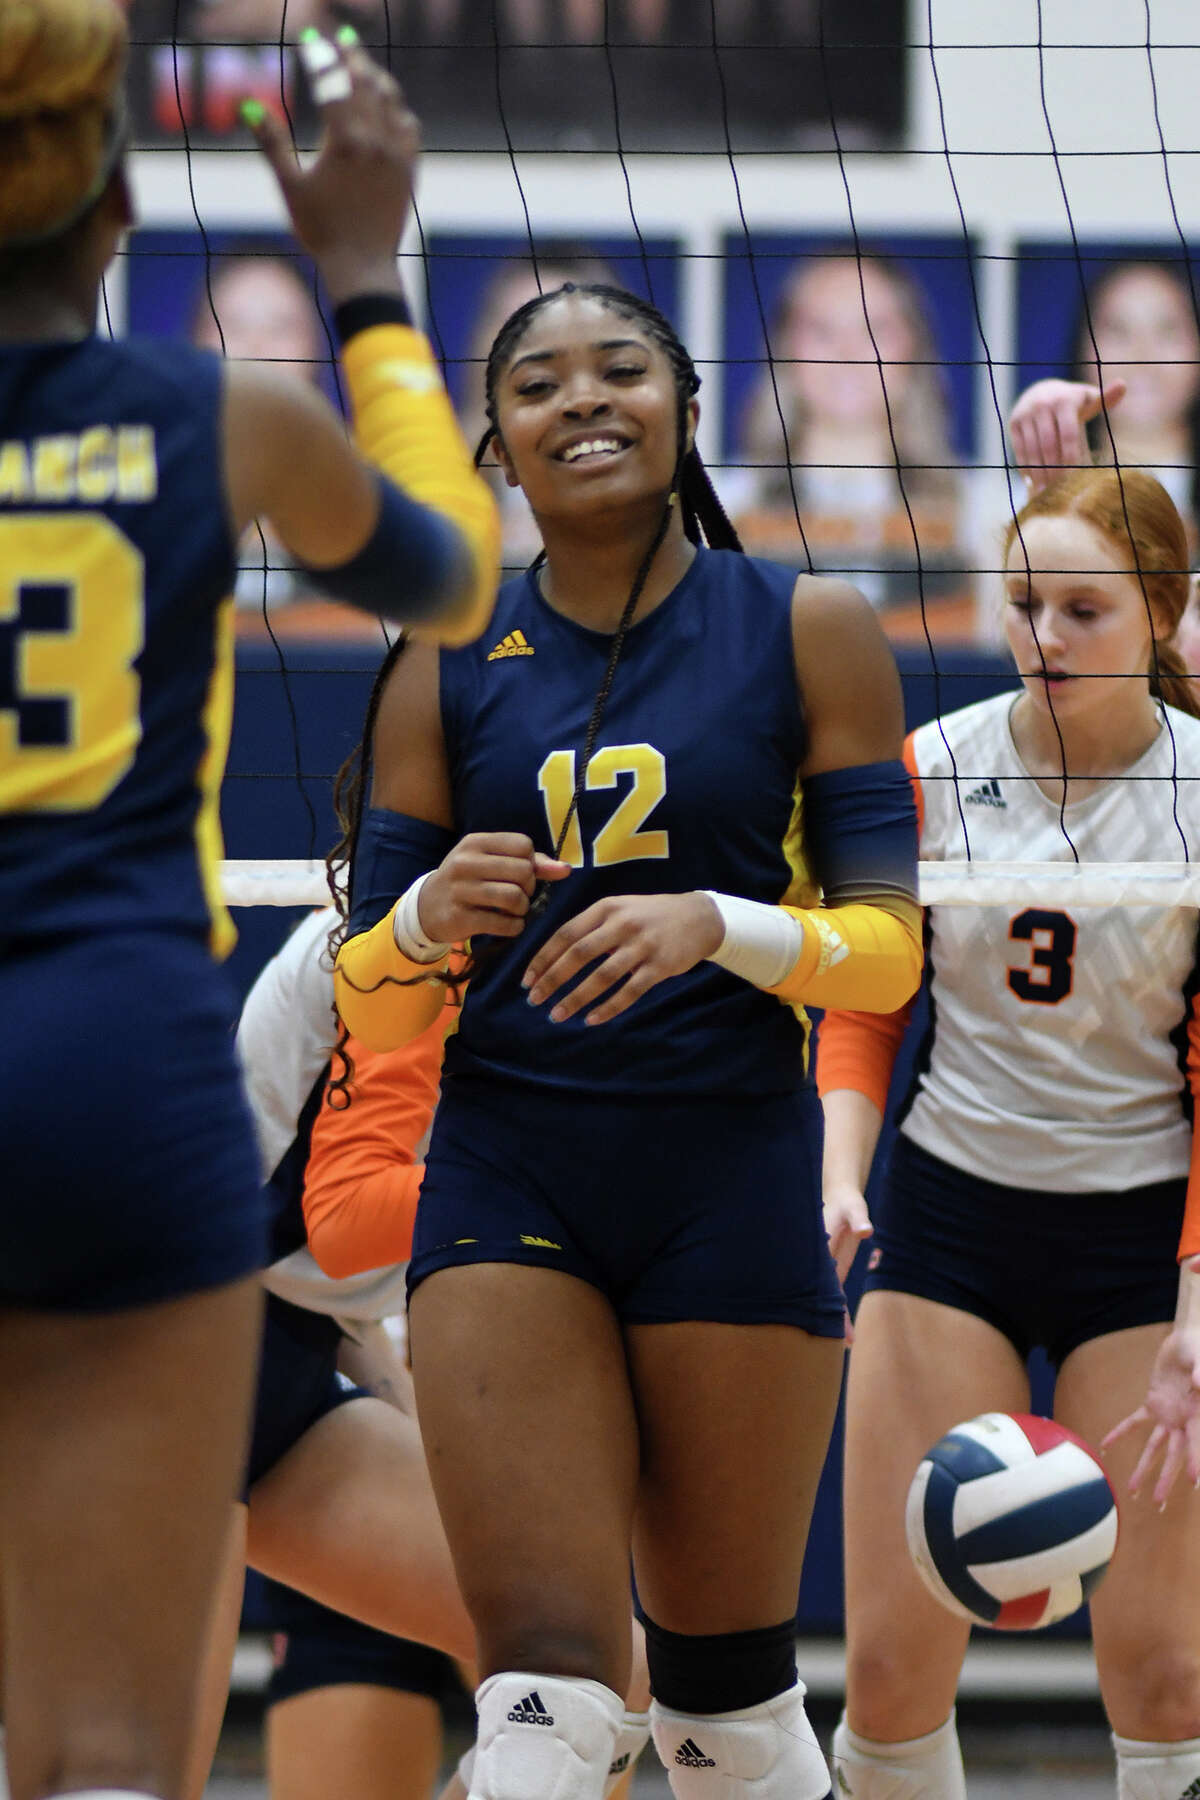 Cy Ranch senior middle blocker Janyah Henderson (12 celebrates a point with teammate Bianna Muoneke, left, against Bridgeland and senior setter Lauren McIntyre (3) during the second set of their district matchup at Bridgeland High School on Sept. 20, 2022.